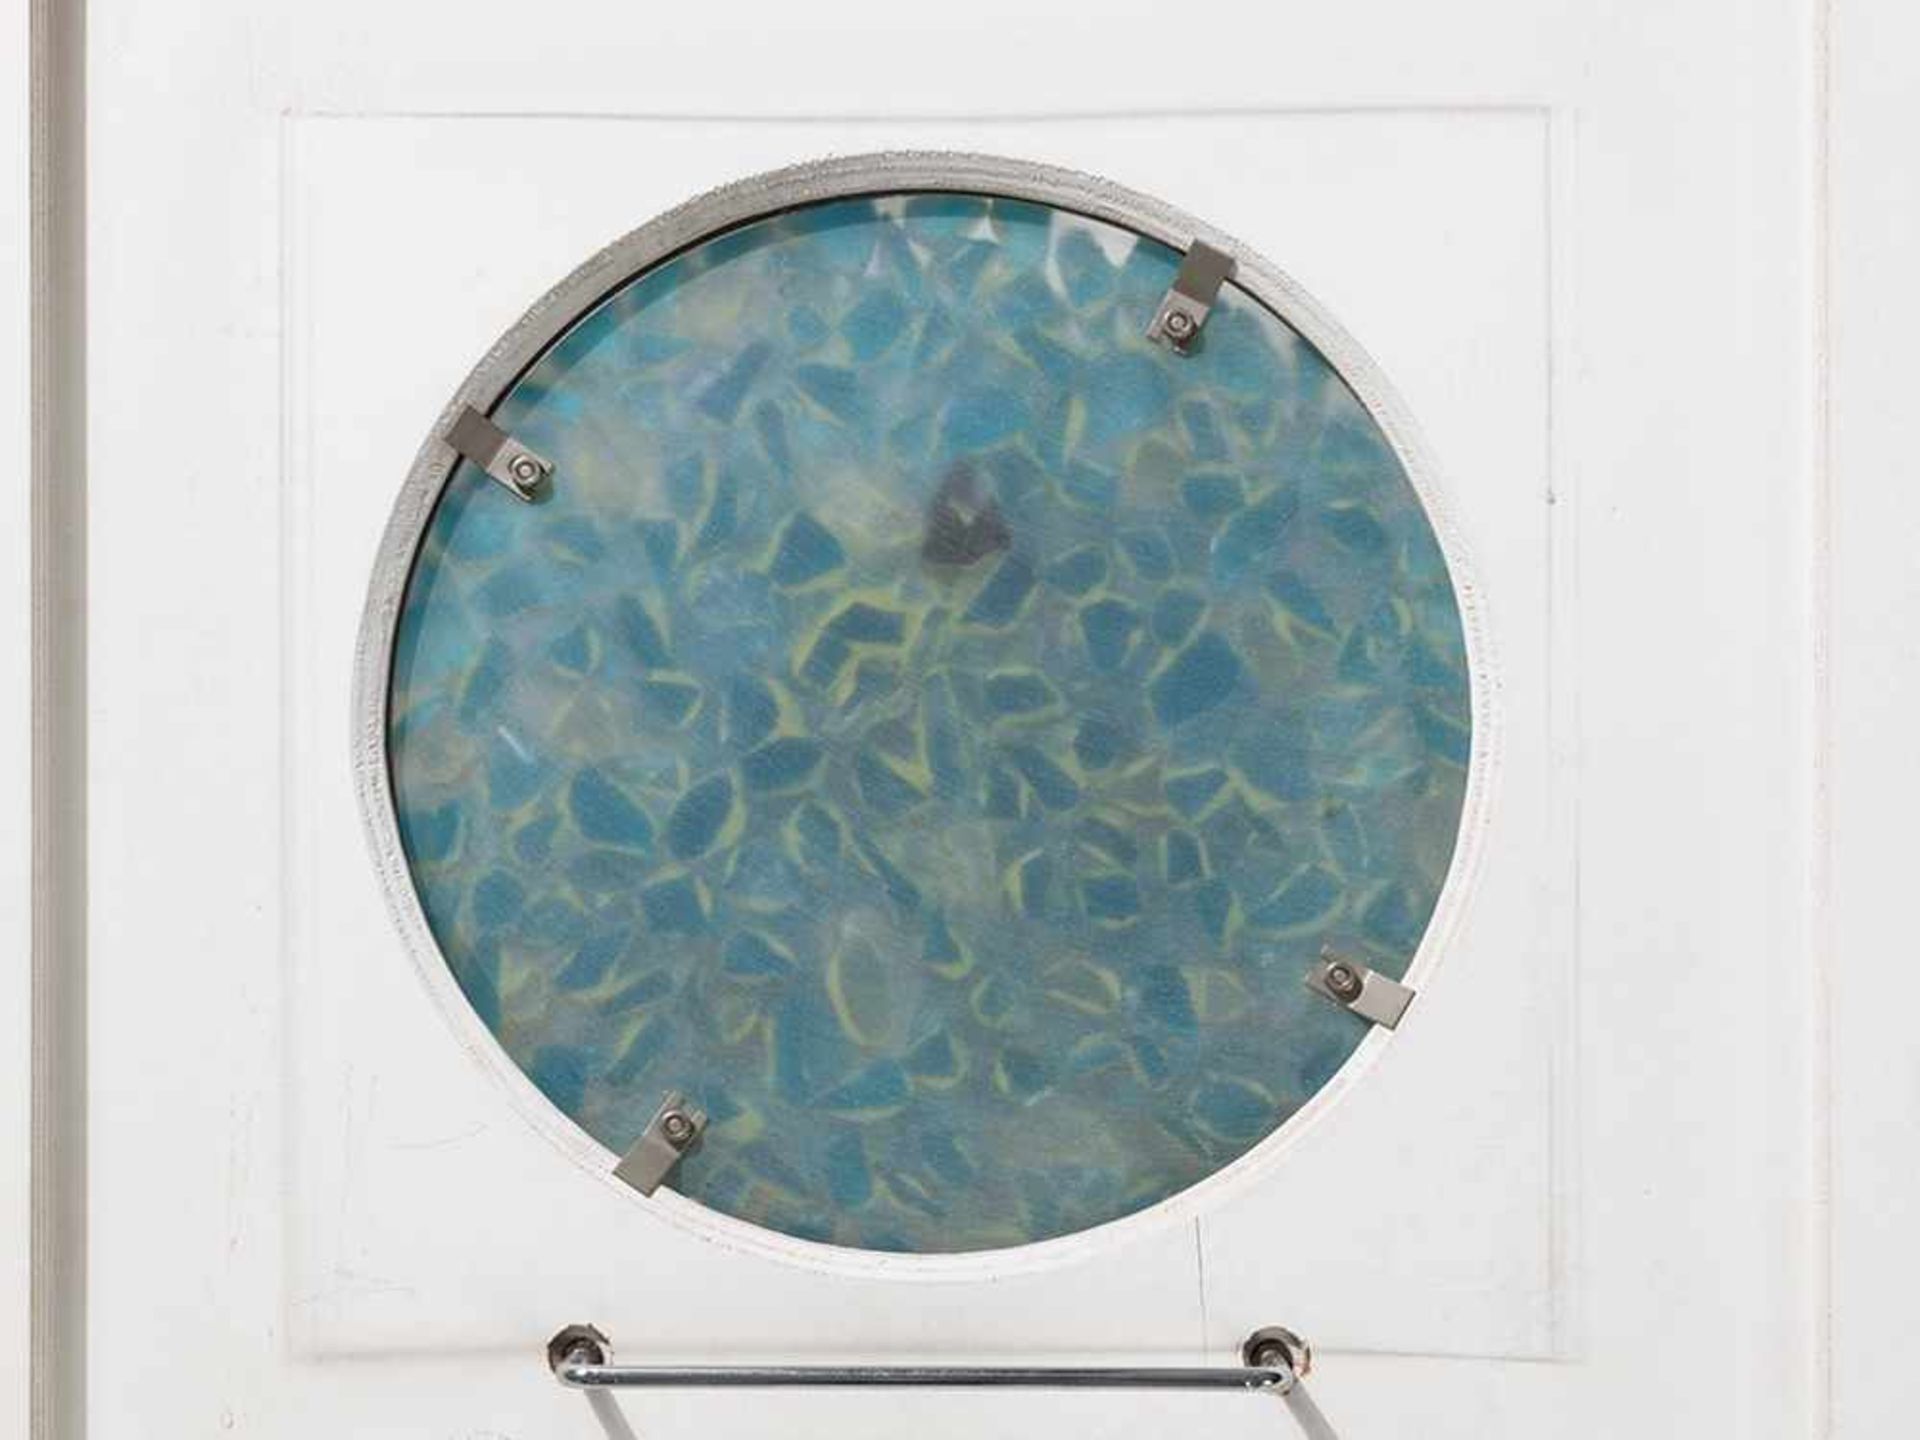 Angelo Brotto, Sconce "Oceano Blu", Esperia, 1973 Glass, colored in various shades of blue, - Image 8 of 9